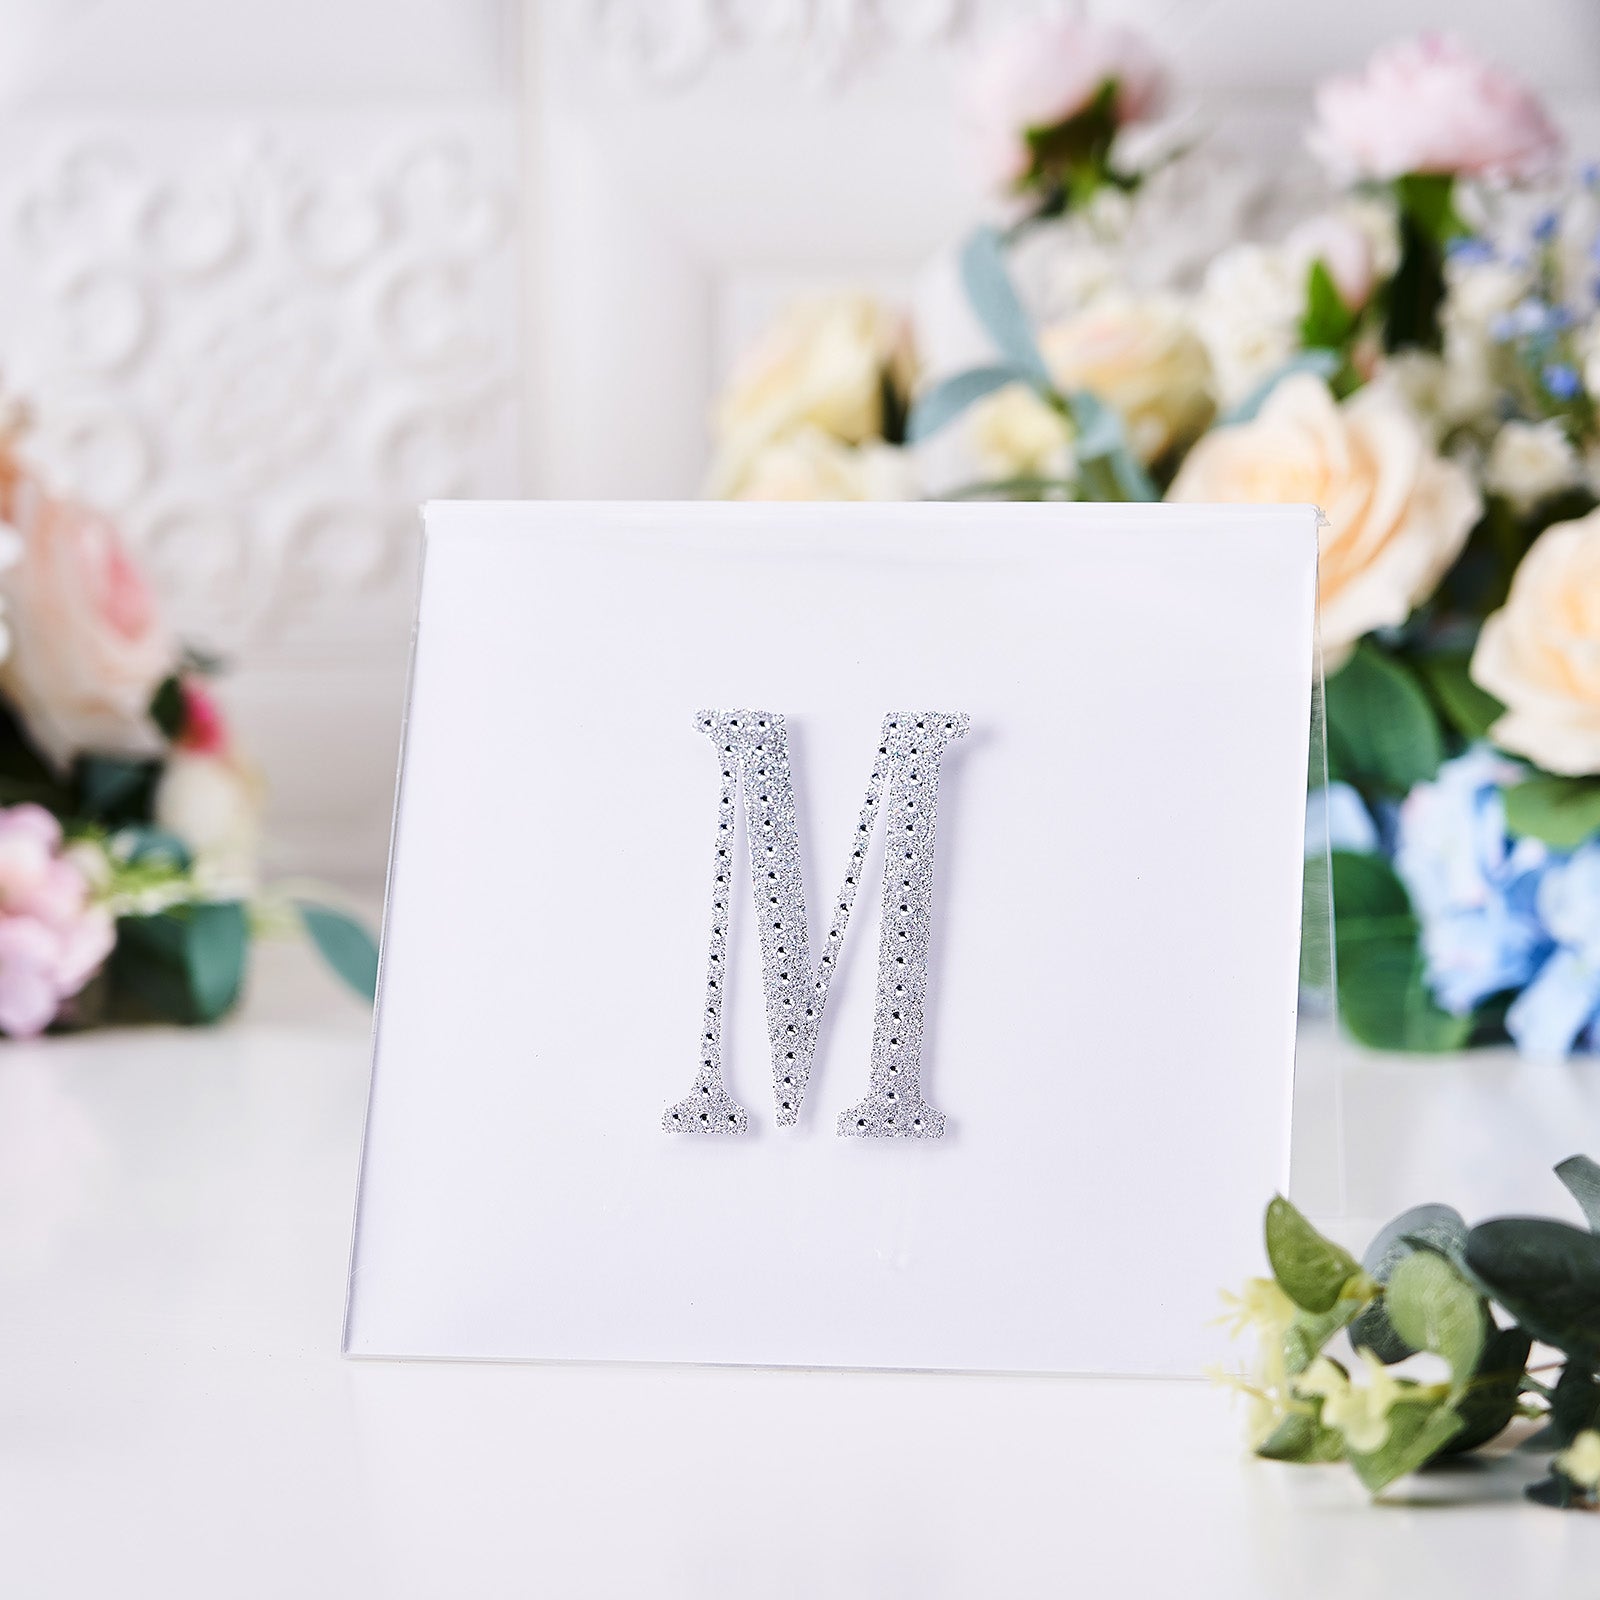 Efavormart 4 inch Letter M Silver Self-Adhesive Rhinestone Number Stickers for DIY Crafts, Handicraft Art, Graduation Cap Decorations Birthday Party